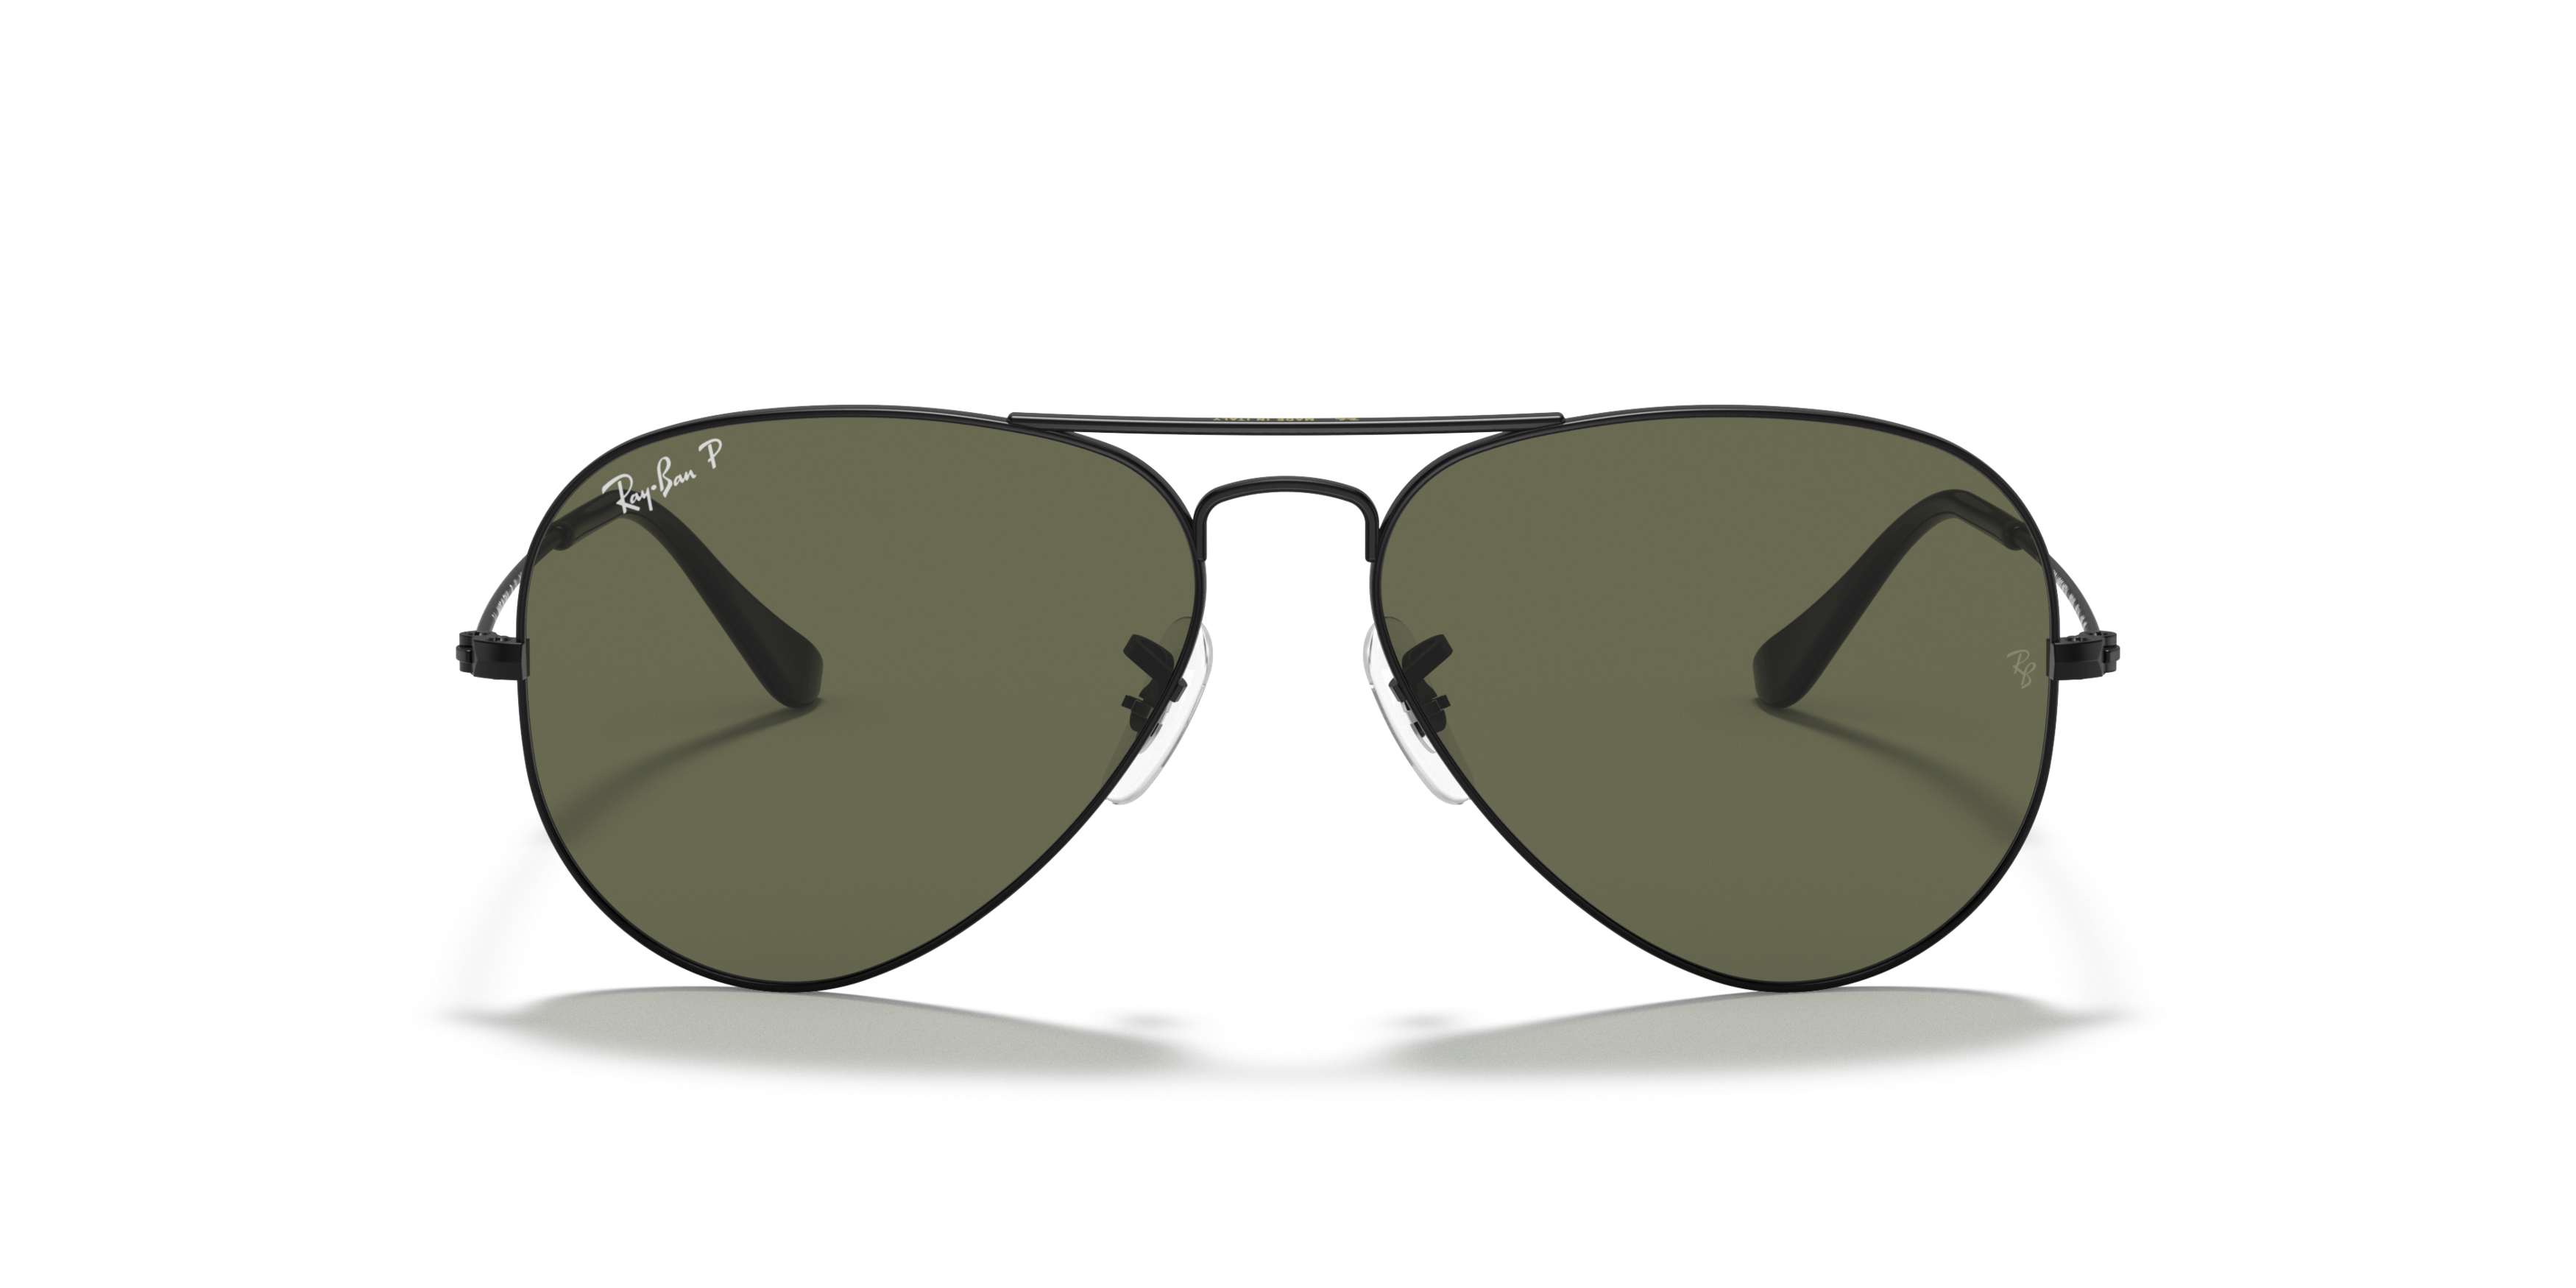 [products.image.front] Ray-Ban AVIATOR 002/58